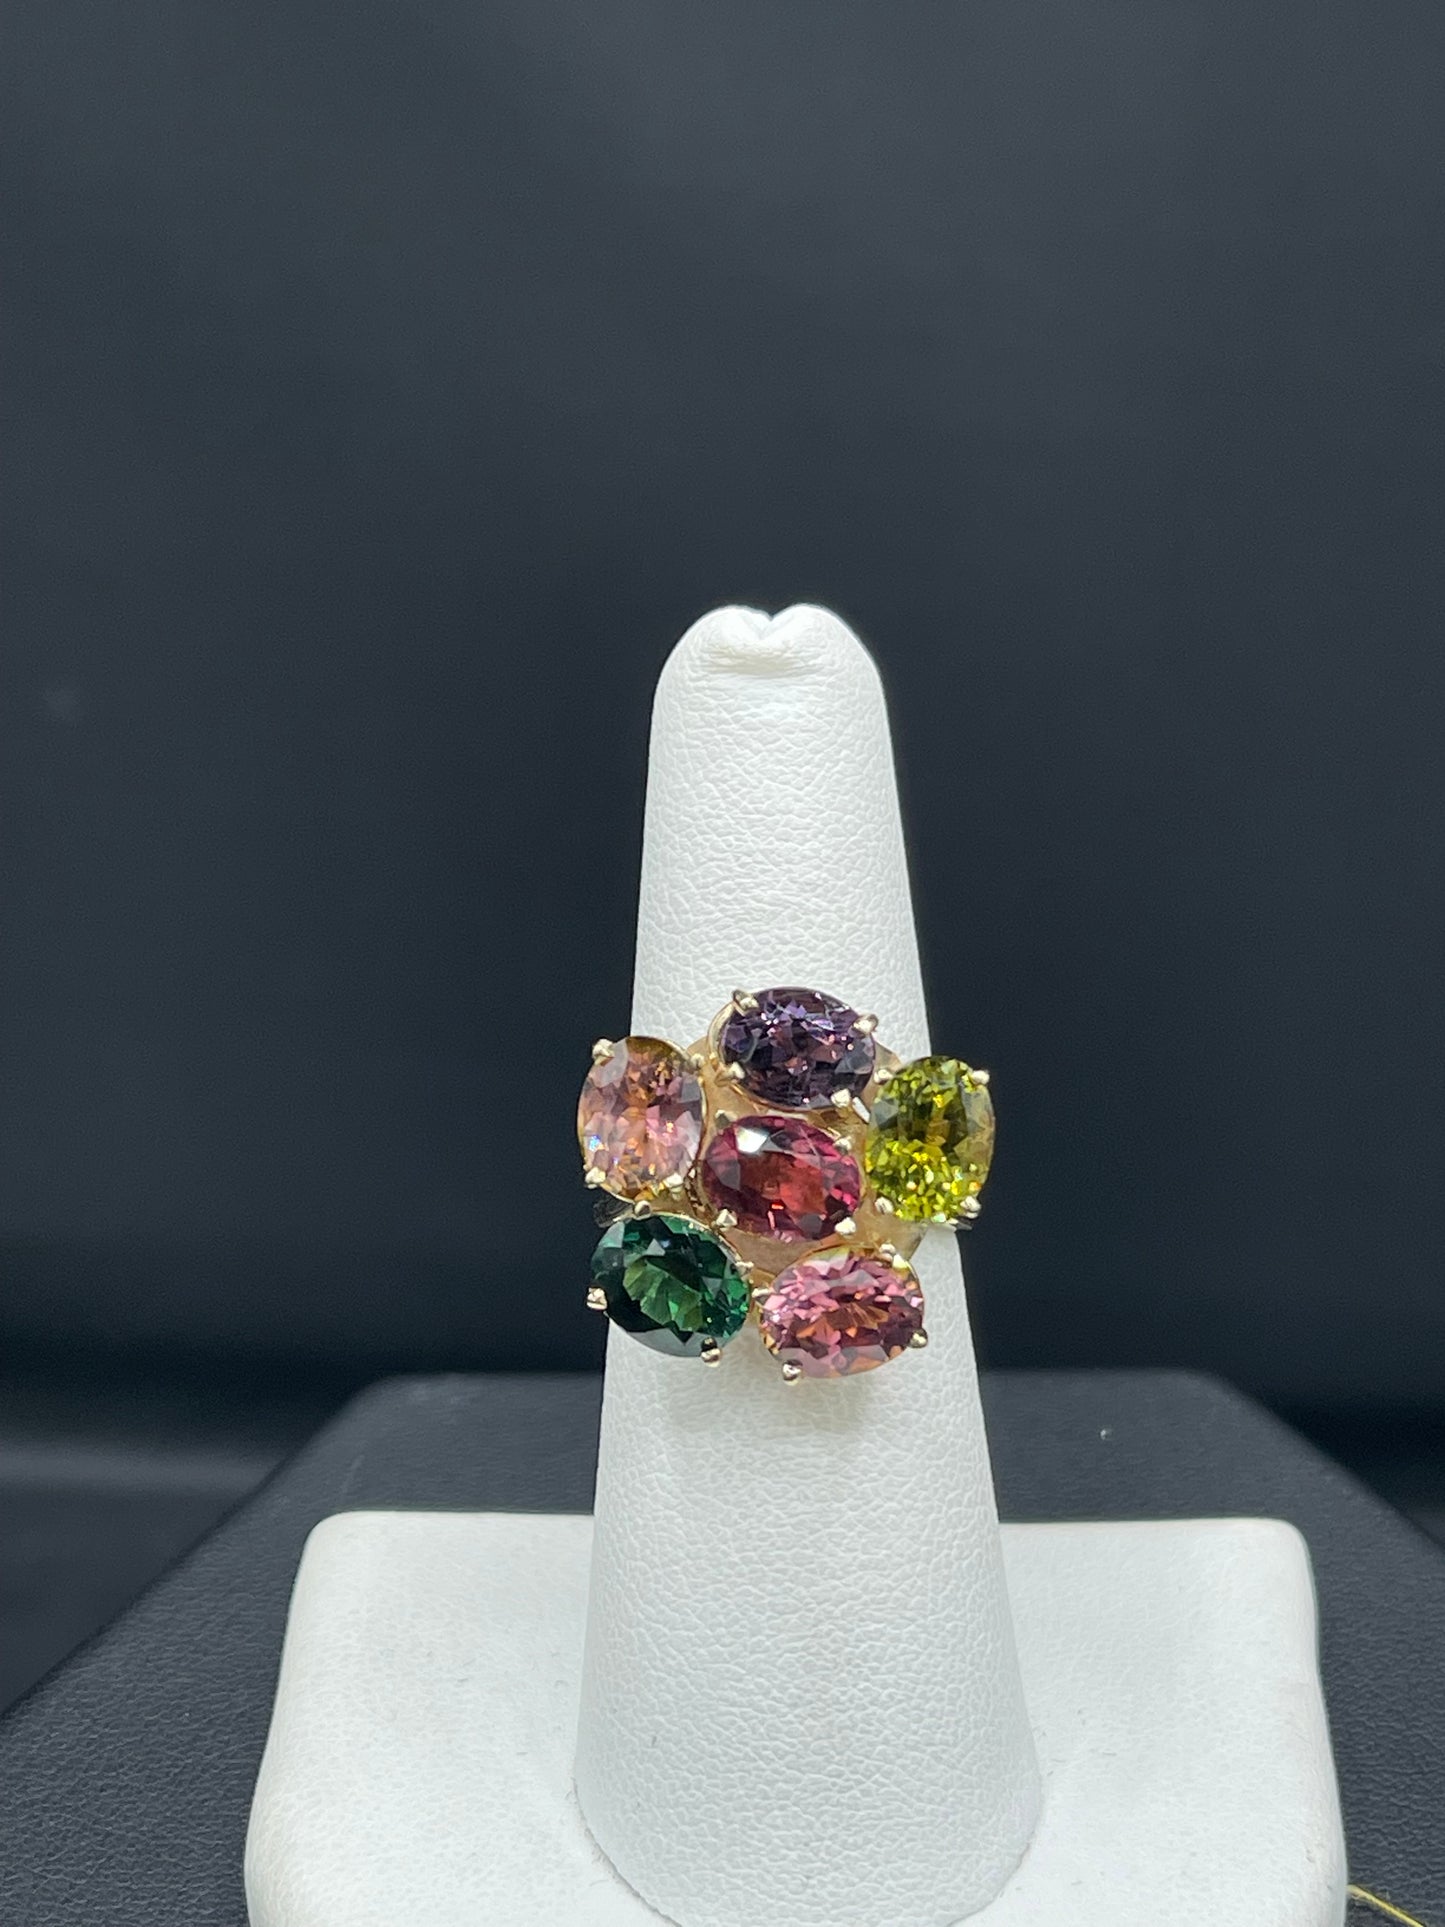 Natural Multi Color Tourmaline 14k Yellow Gold Ring (Size 6.5)